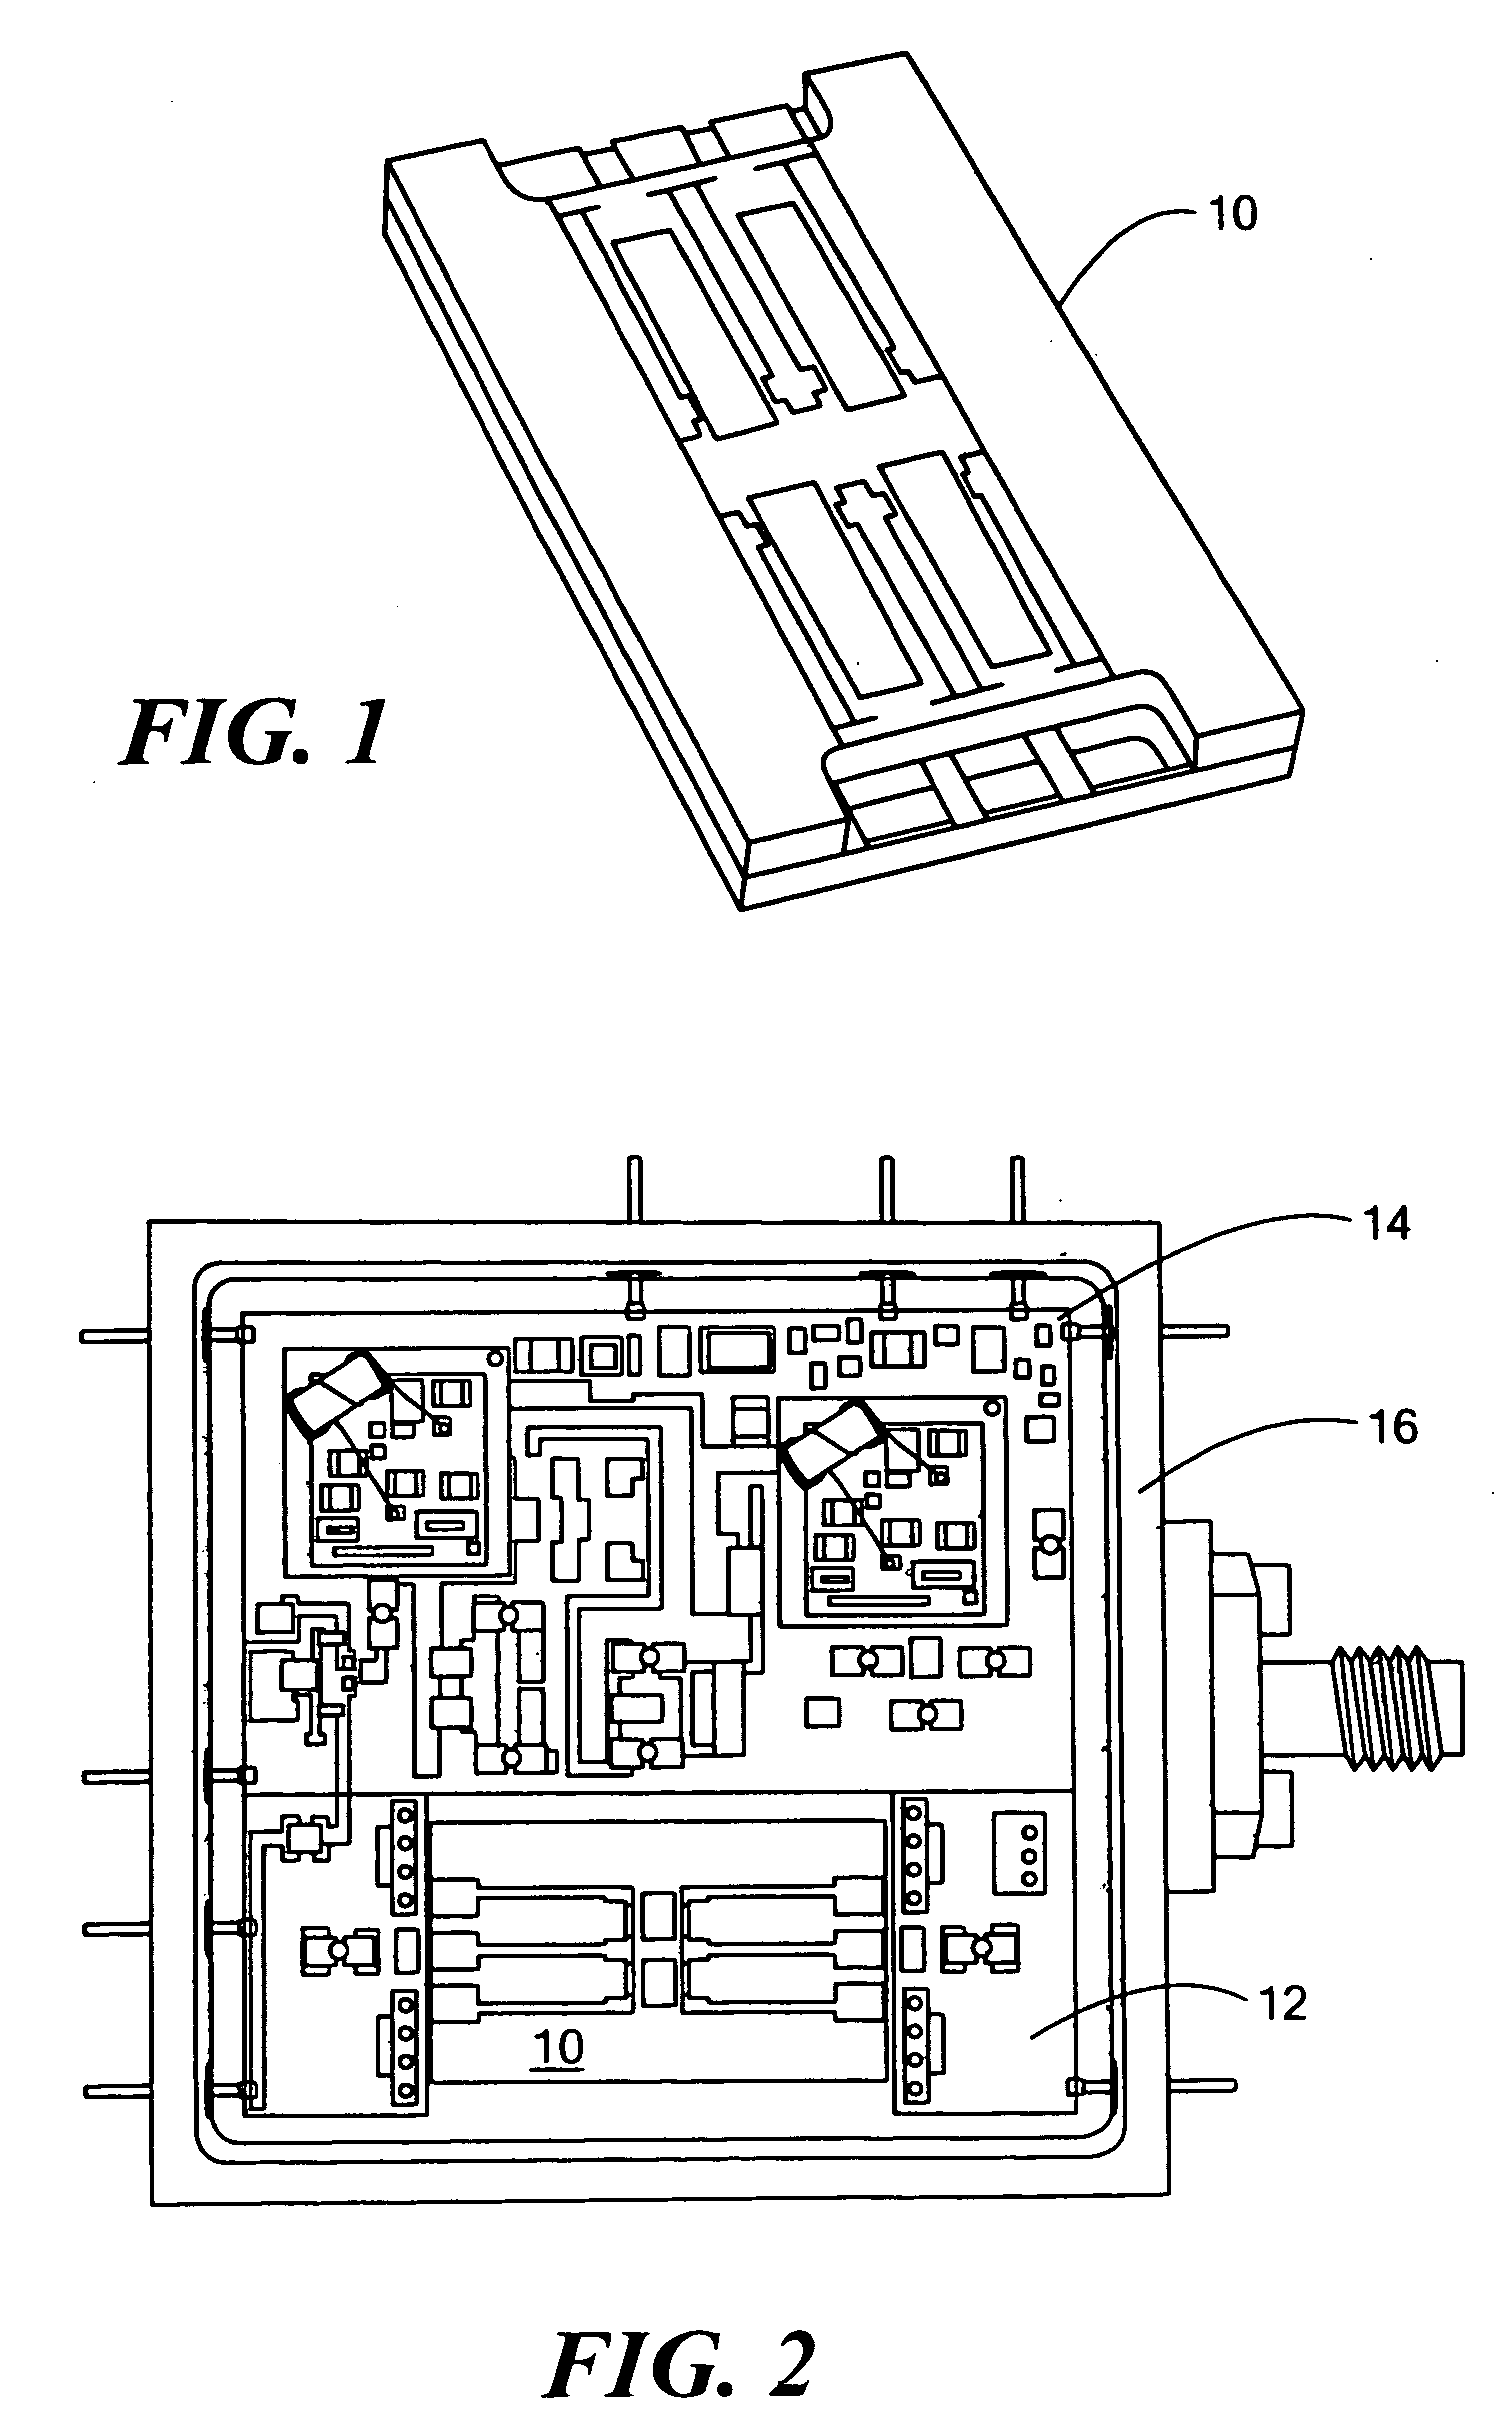 Integrated saw device heater